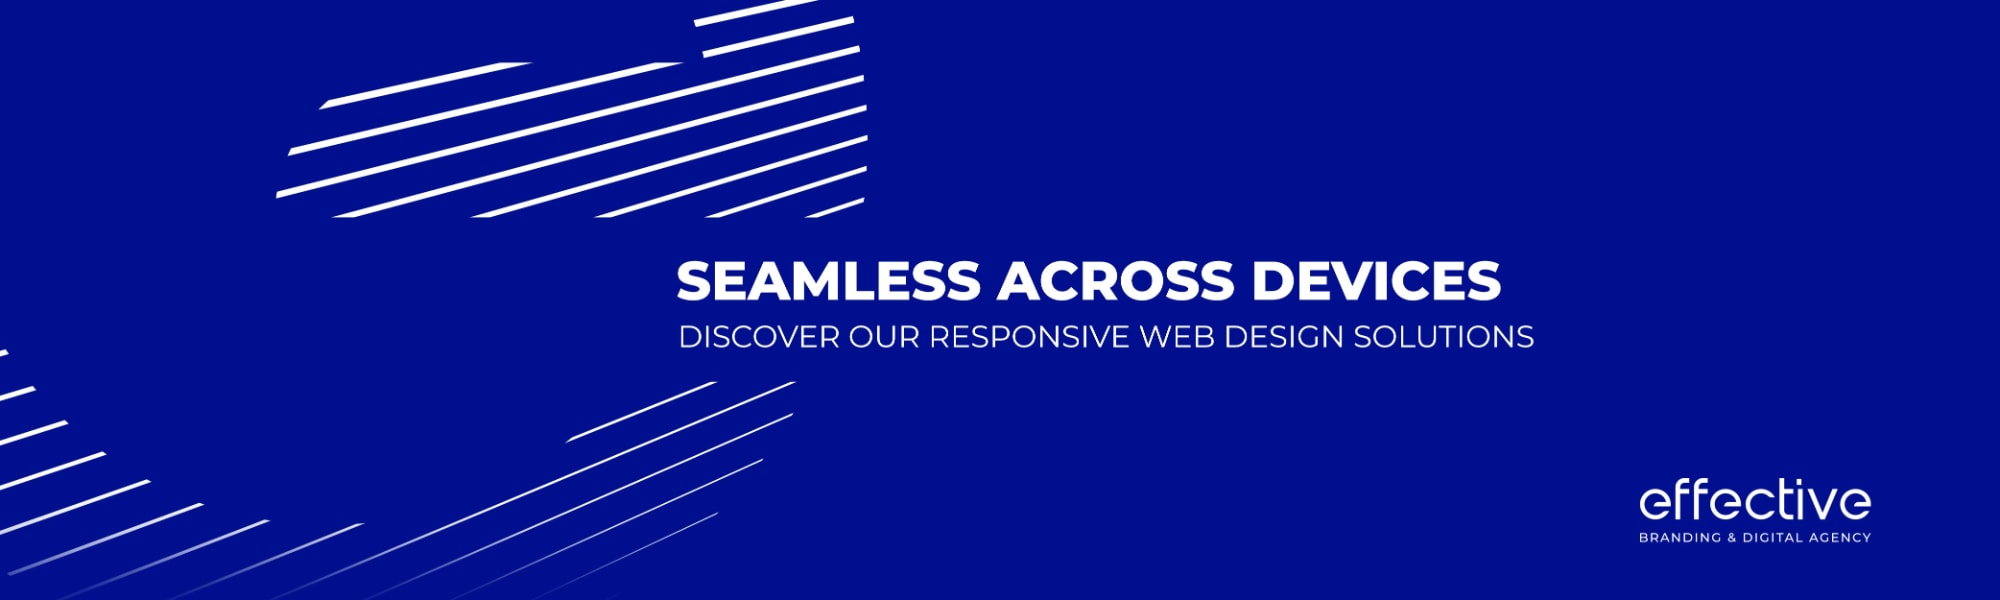 Seamless Across Devices Discover Our Responsive Web Design Solutions